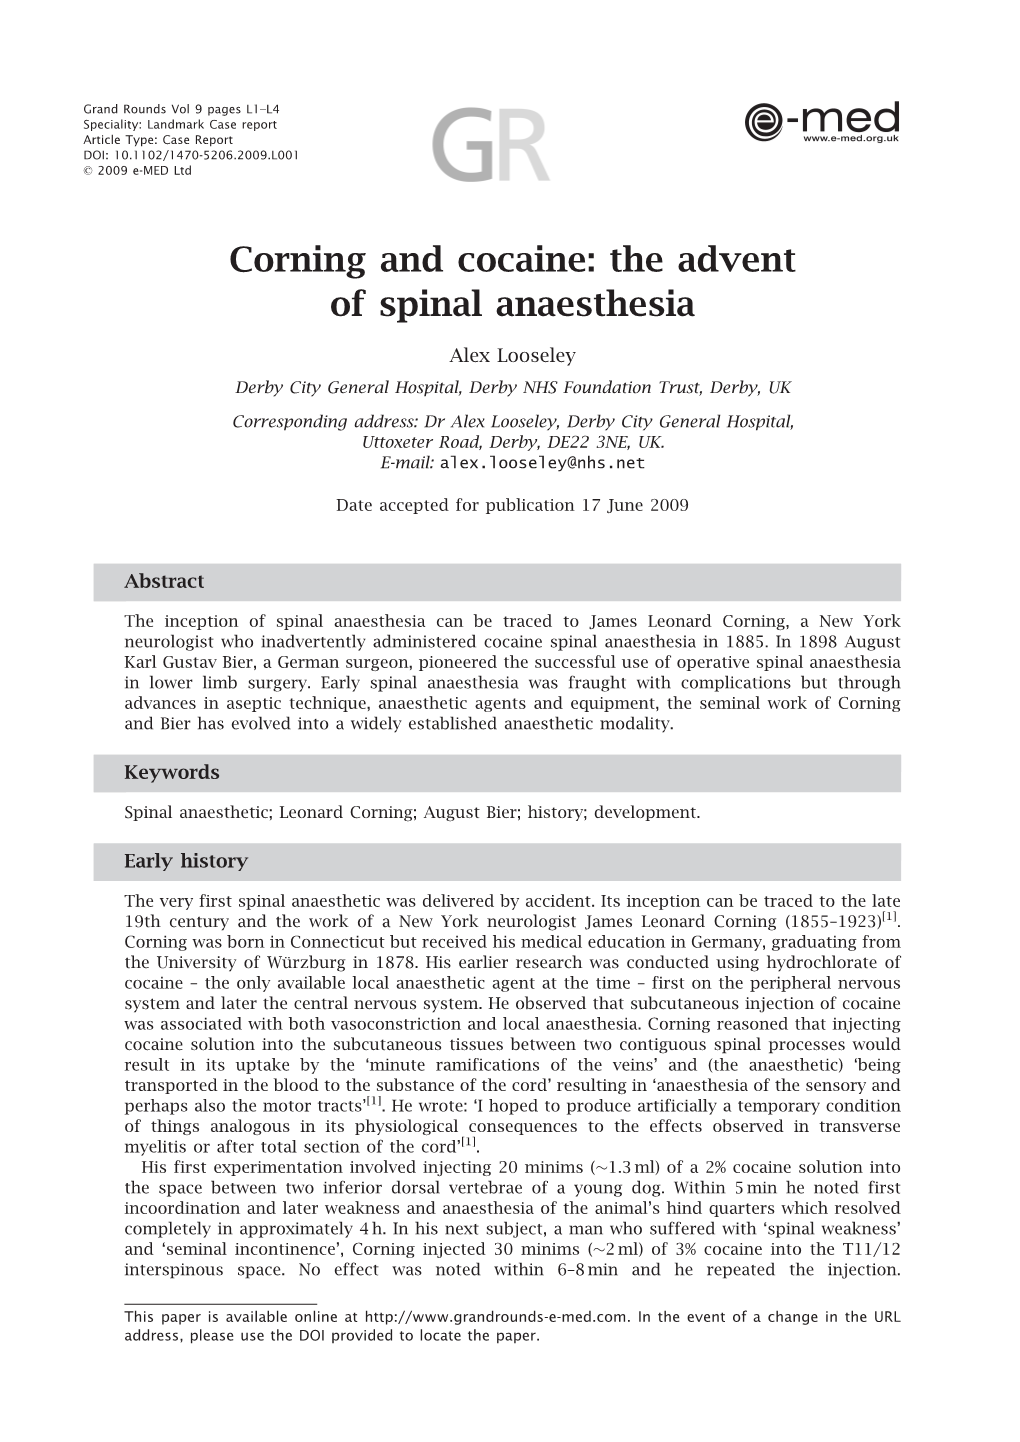 Corning and Cocaine: the Advent of Spinal Anaesthesia